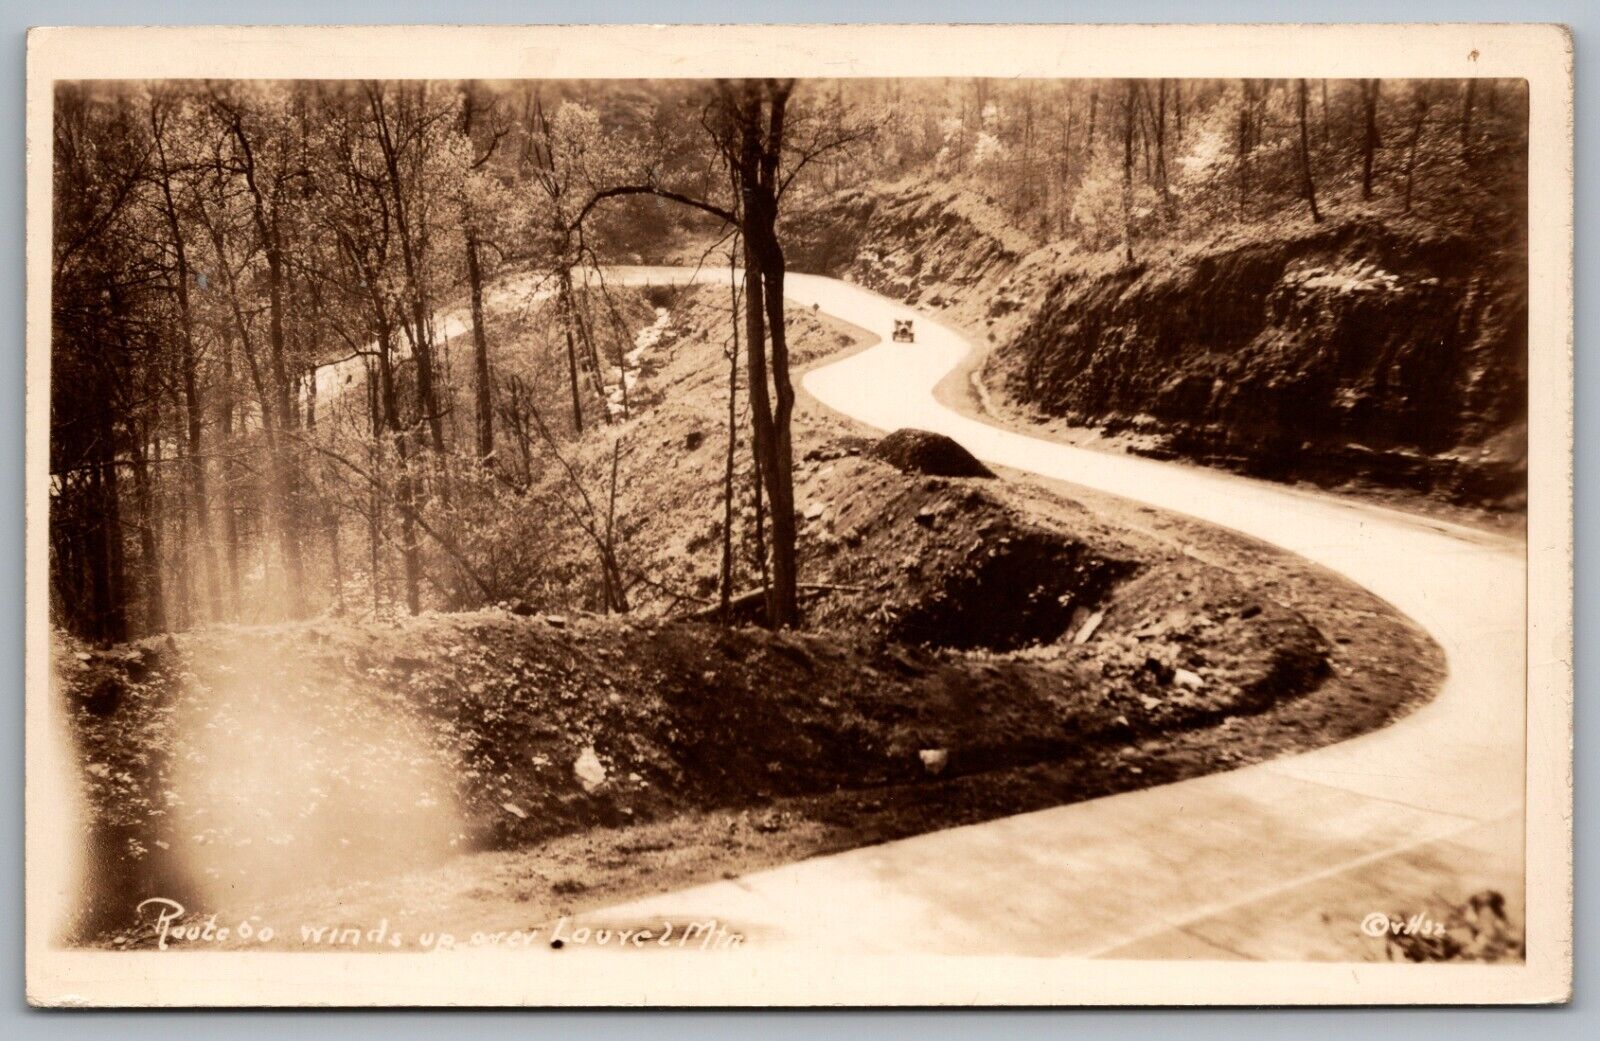 Postcard RPPC, Route 60 Winds Up Over Laurel Mountain Massachusetts  Posted 1945